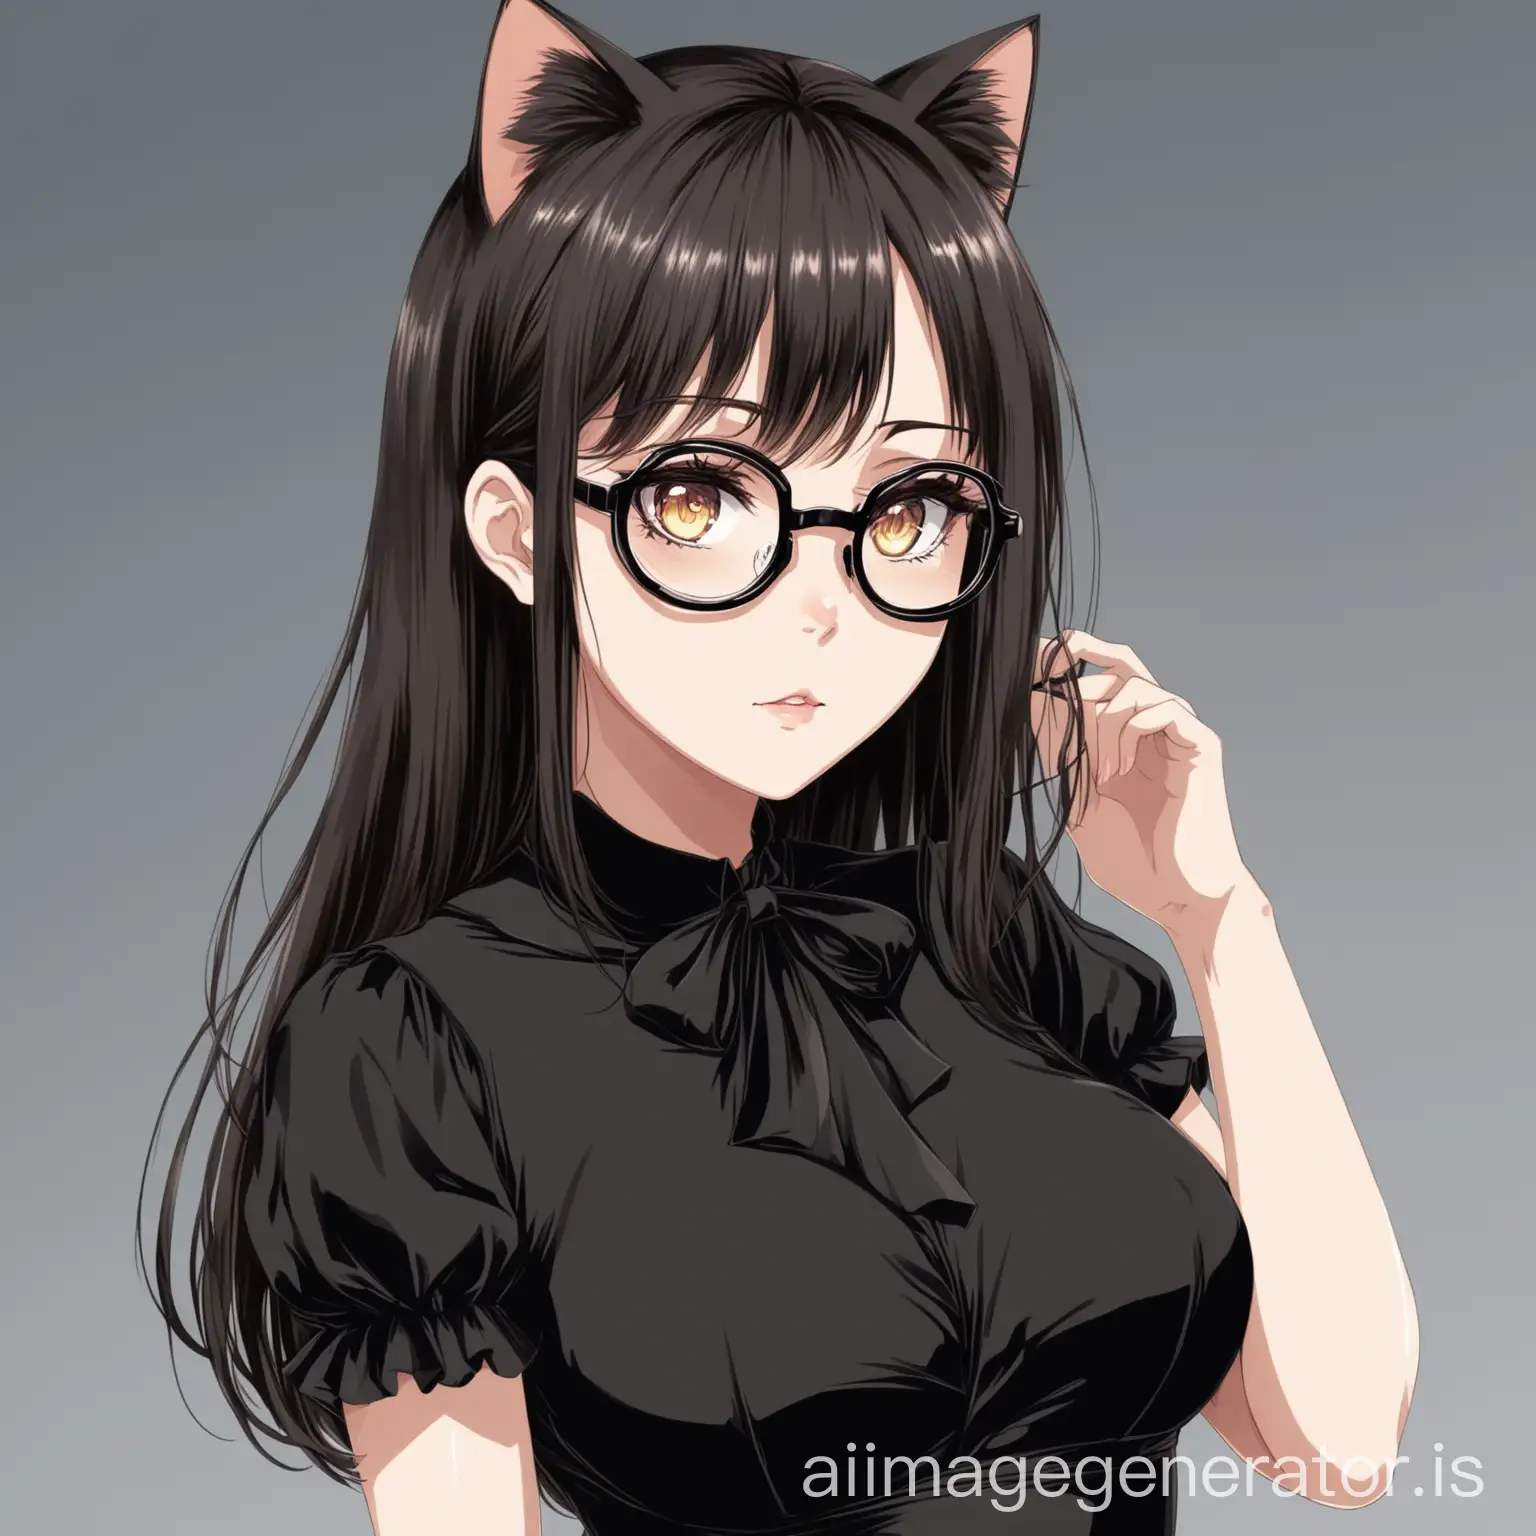 Attractive-Anime-Girl-in-Stylish-Black-Dress-and-Cat-Eye-Spectacles